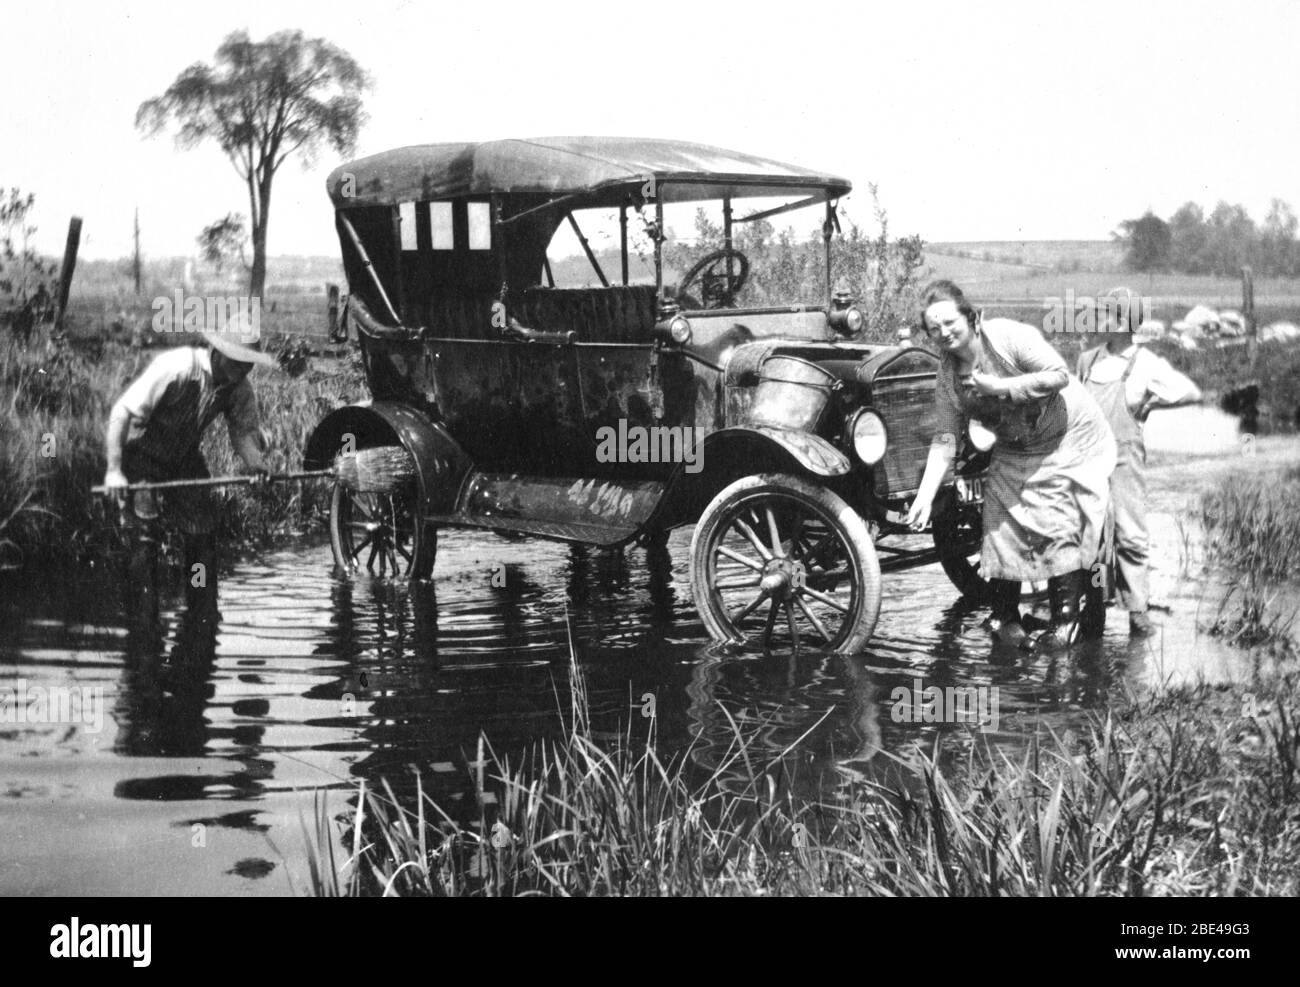 A farm family washing their car in a local creek, near Allenton, Wisconsin,  USA, in 1921. Dad uses a house broom to wash wheels while the lady works on  the front radiator